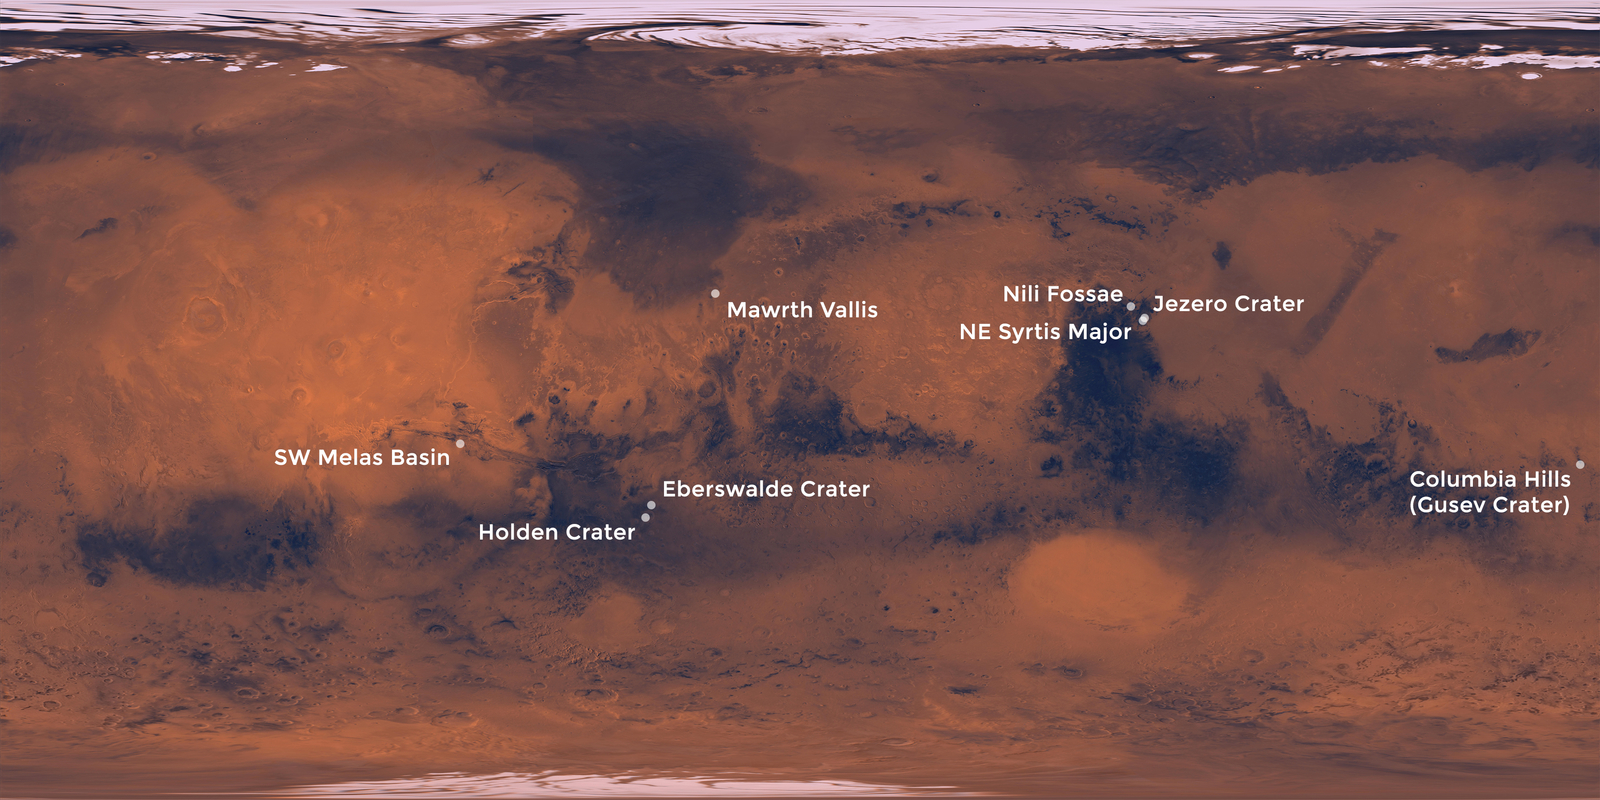 These eight places on Mars are potential landing sites under consideration as the destination for the Mars 2020 rover mission.